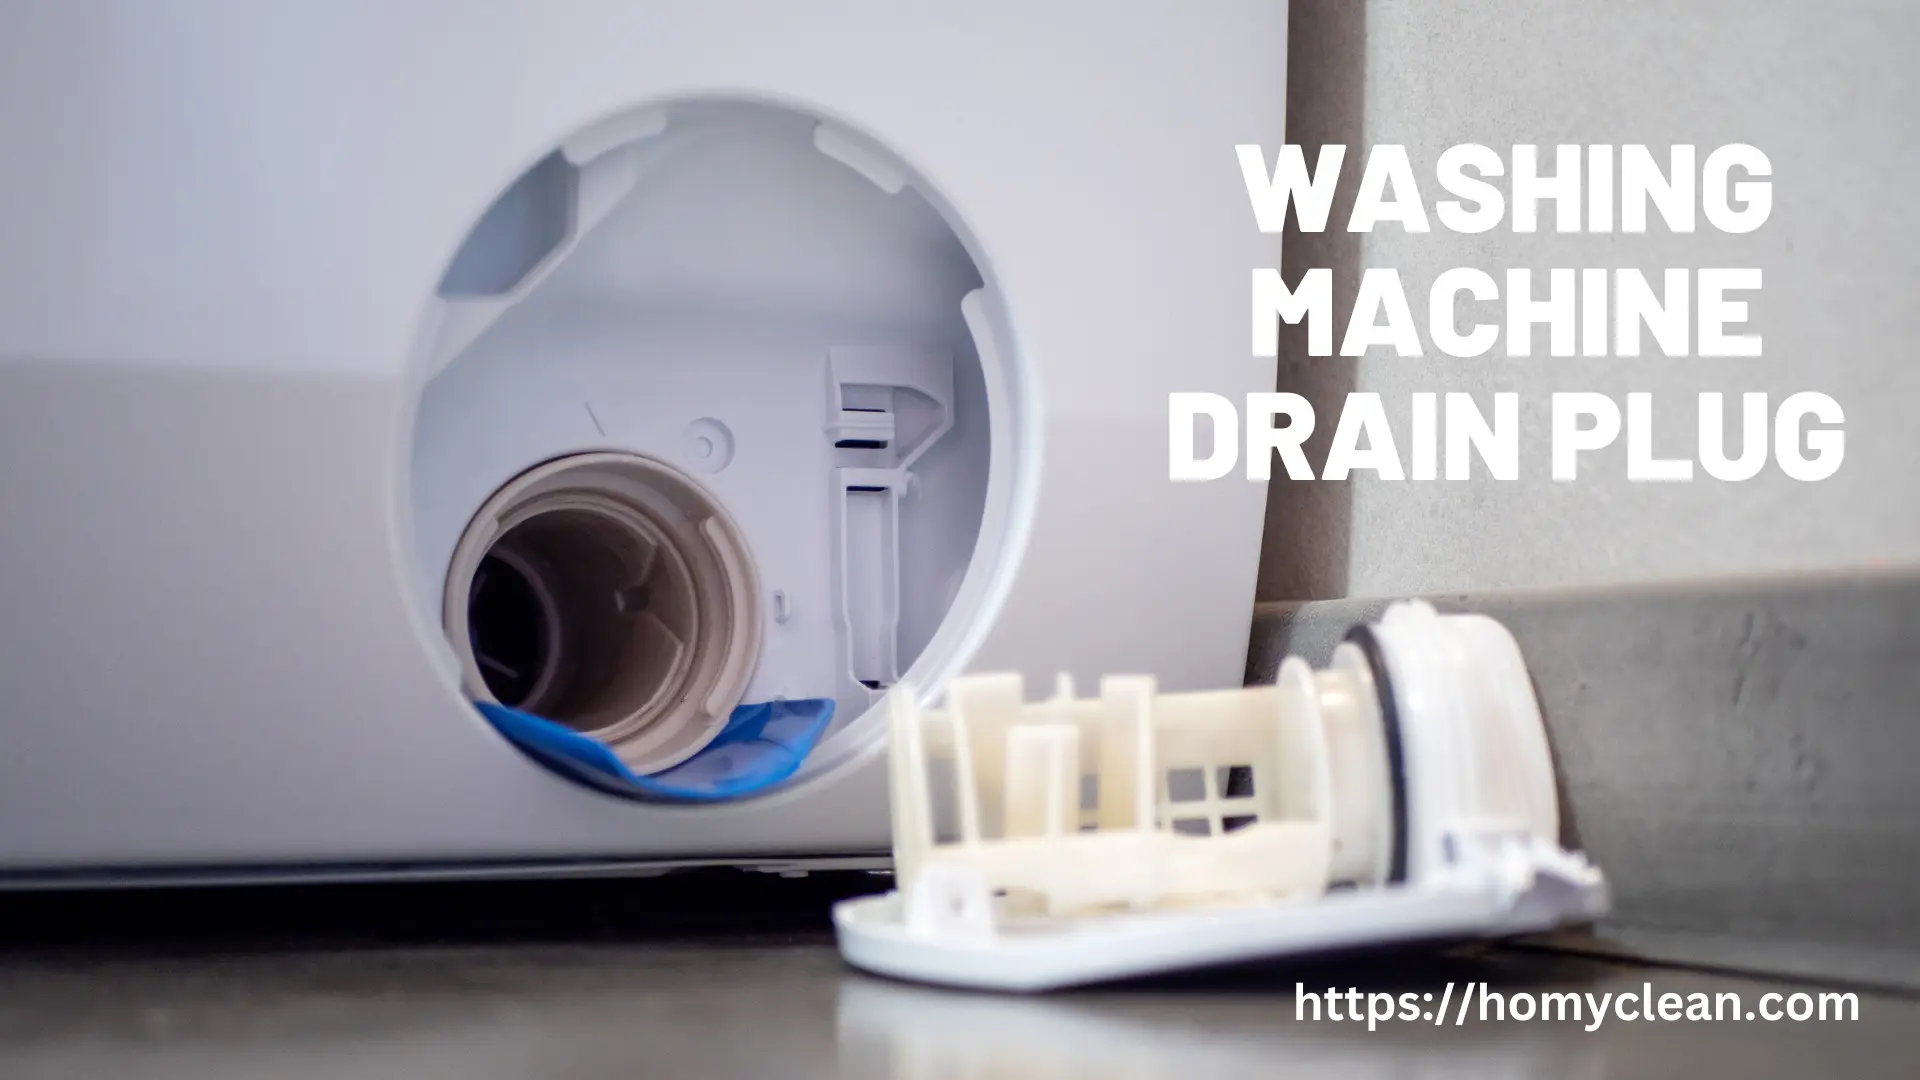 Washing Machine Drain Plug: A Complete Guide for Hassle-Free Laundry